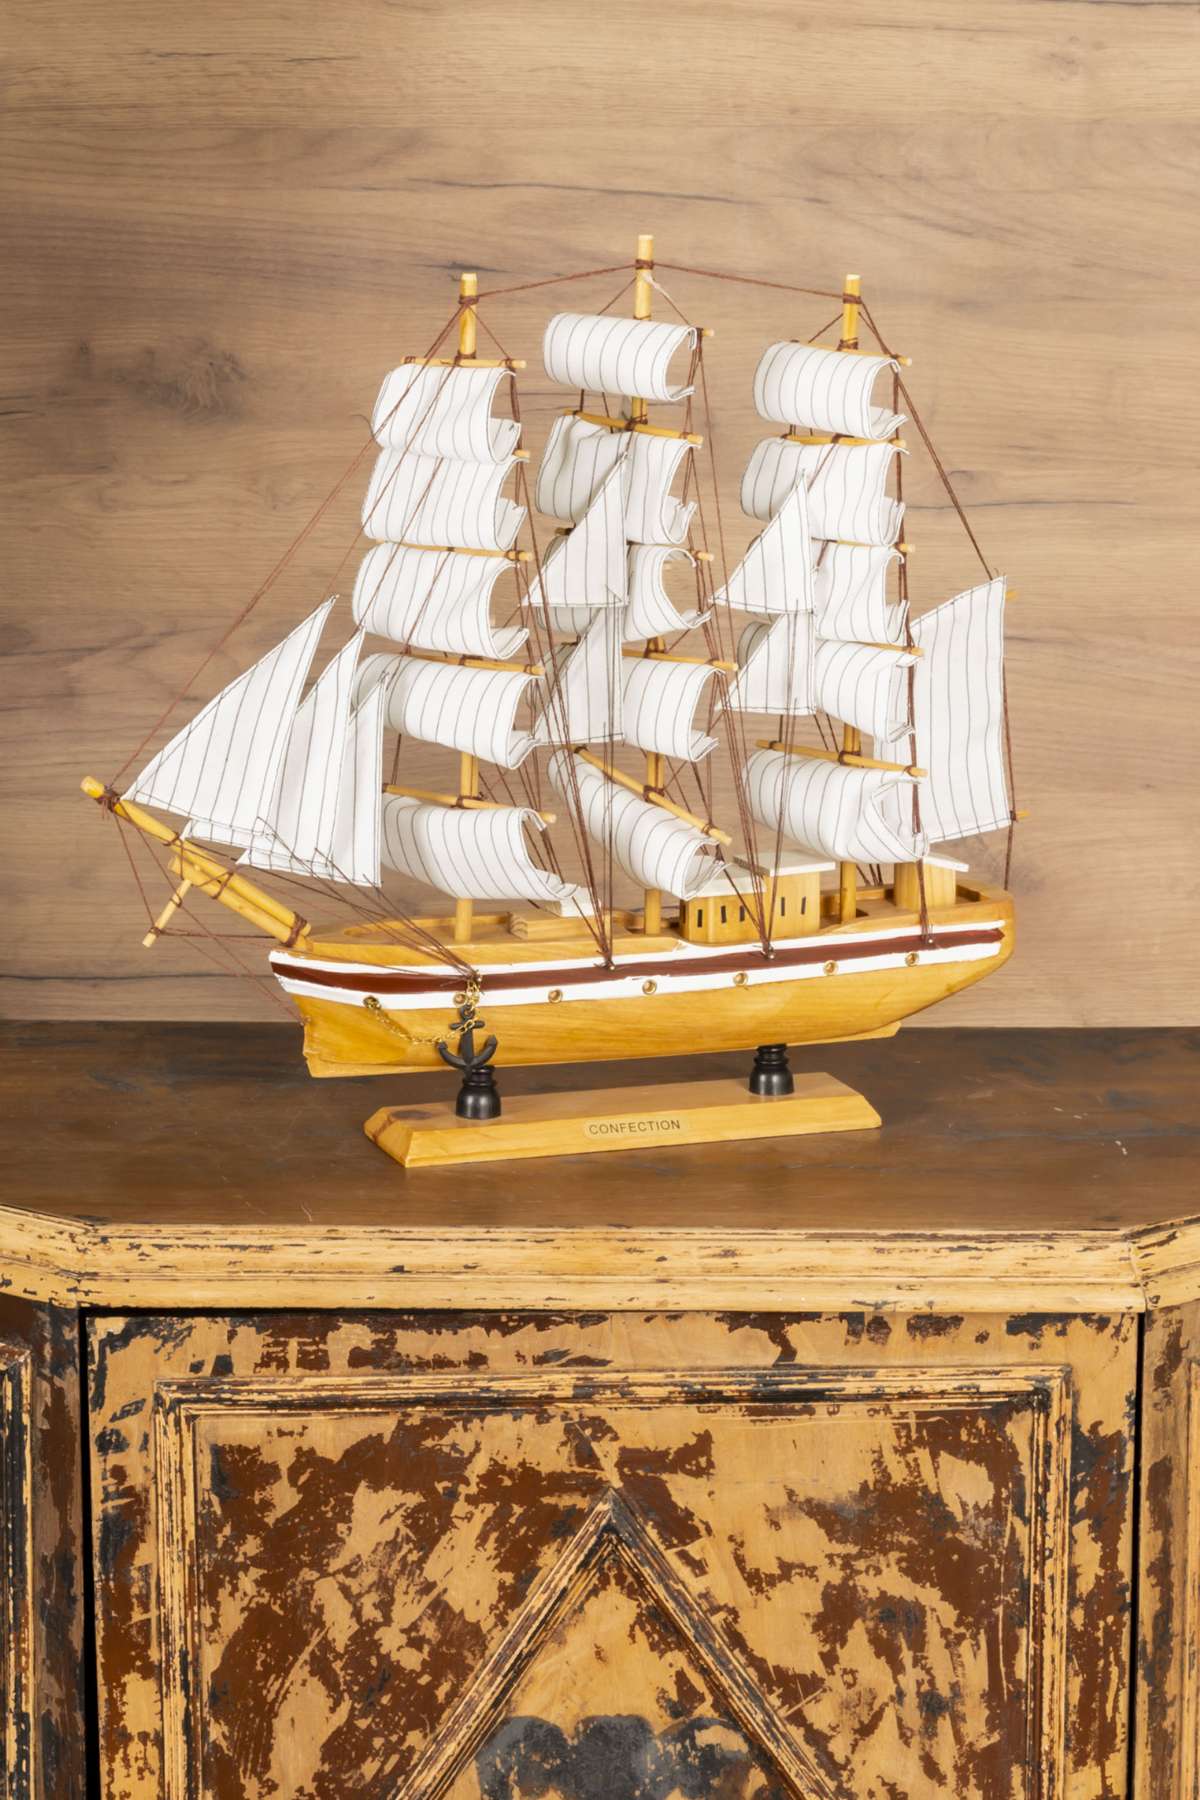 The 'Confection' model ship